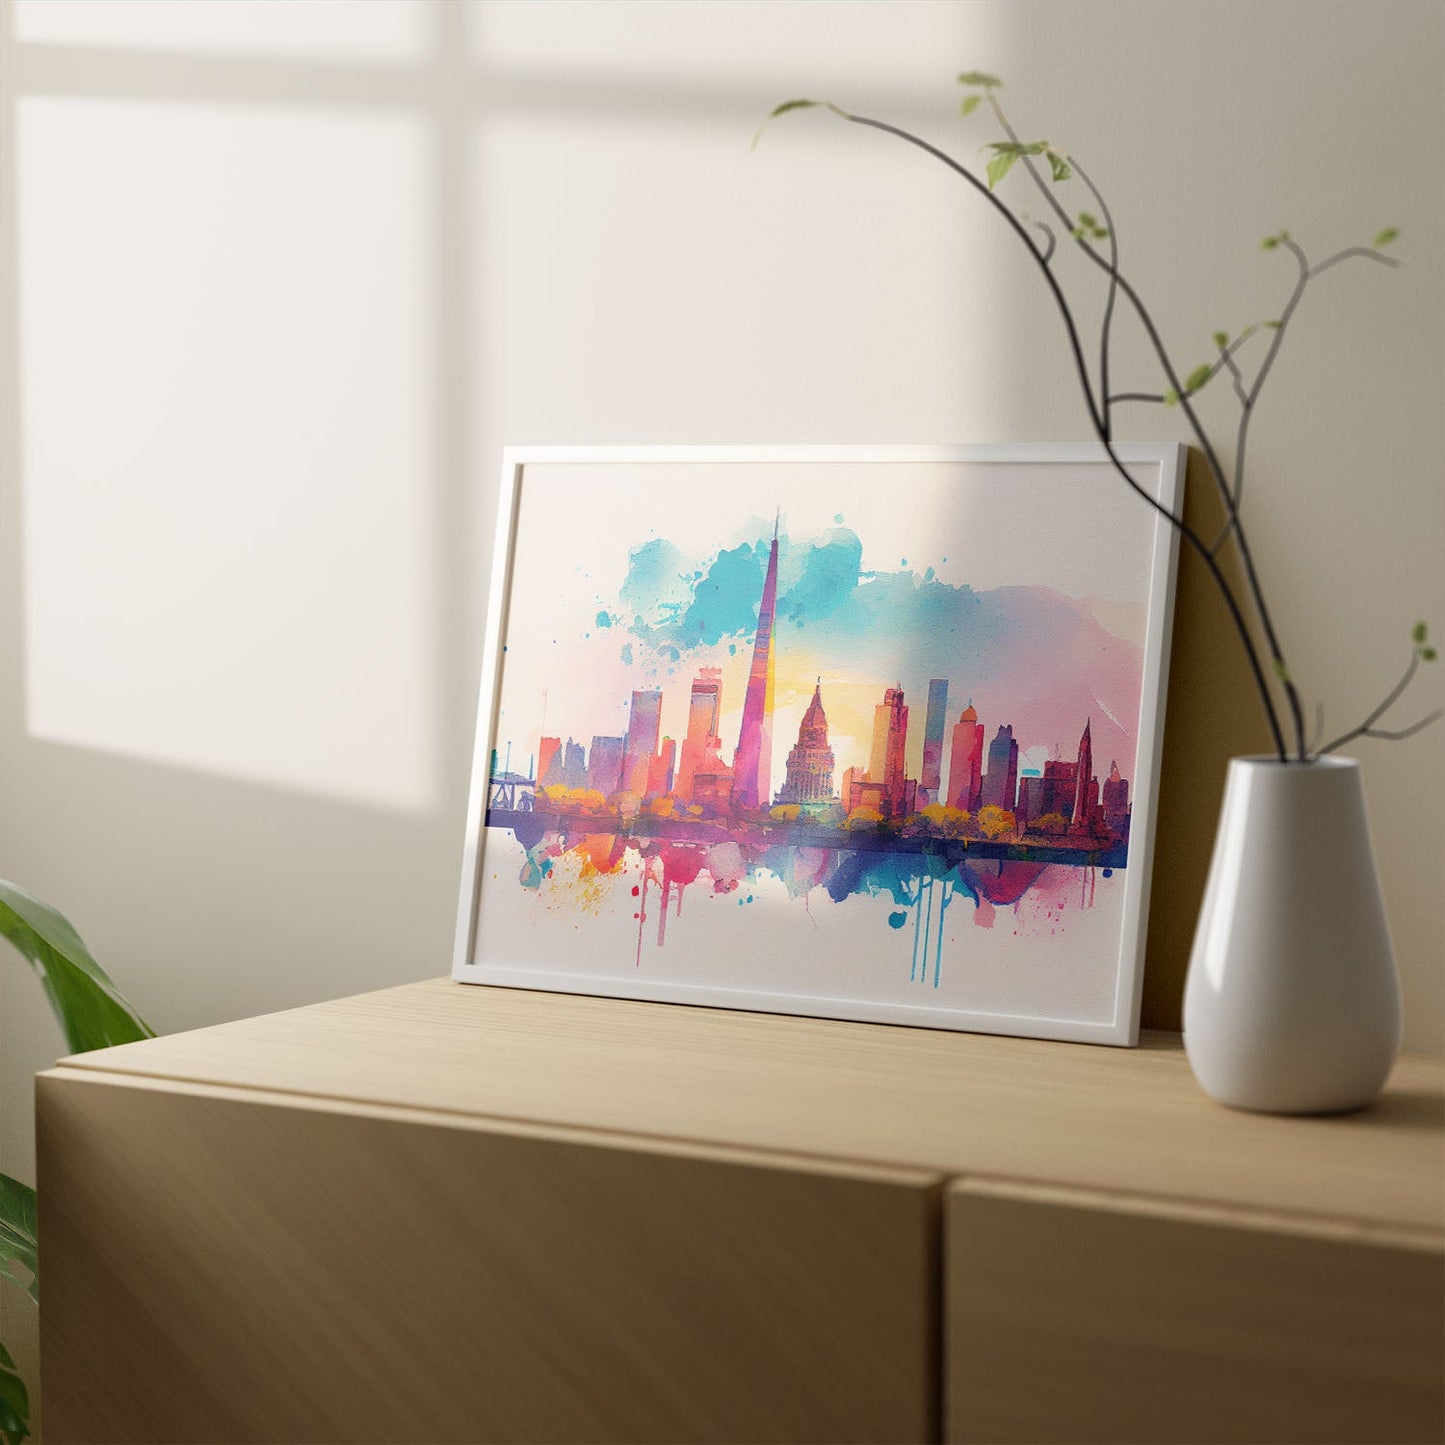 Nacnic watercolor of a skyline of the city of Buenos Aires_1. Aesthetic Wall Art Prints for Bedroom or Living Room Design.